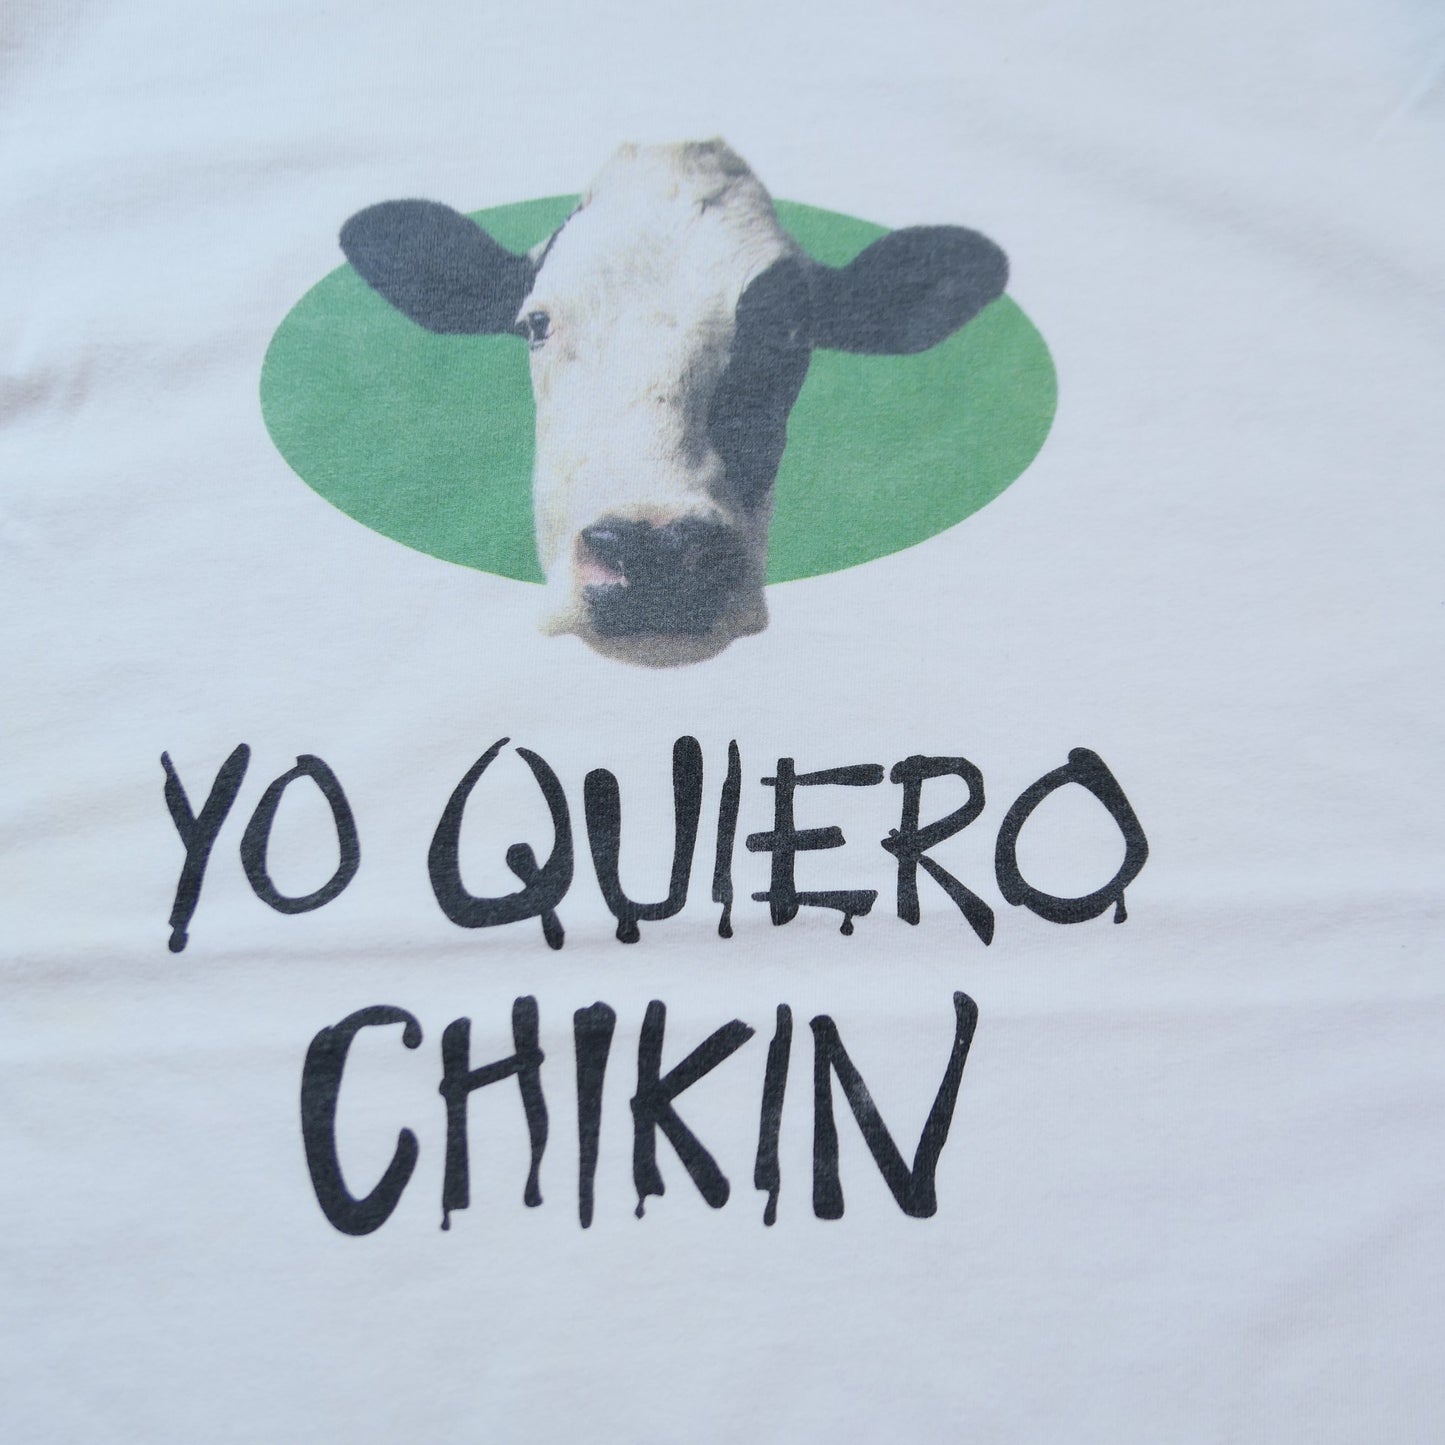 VINTAGE 90-00s XL Promotion Tee -Chick-fil-A-